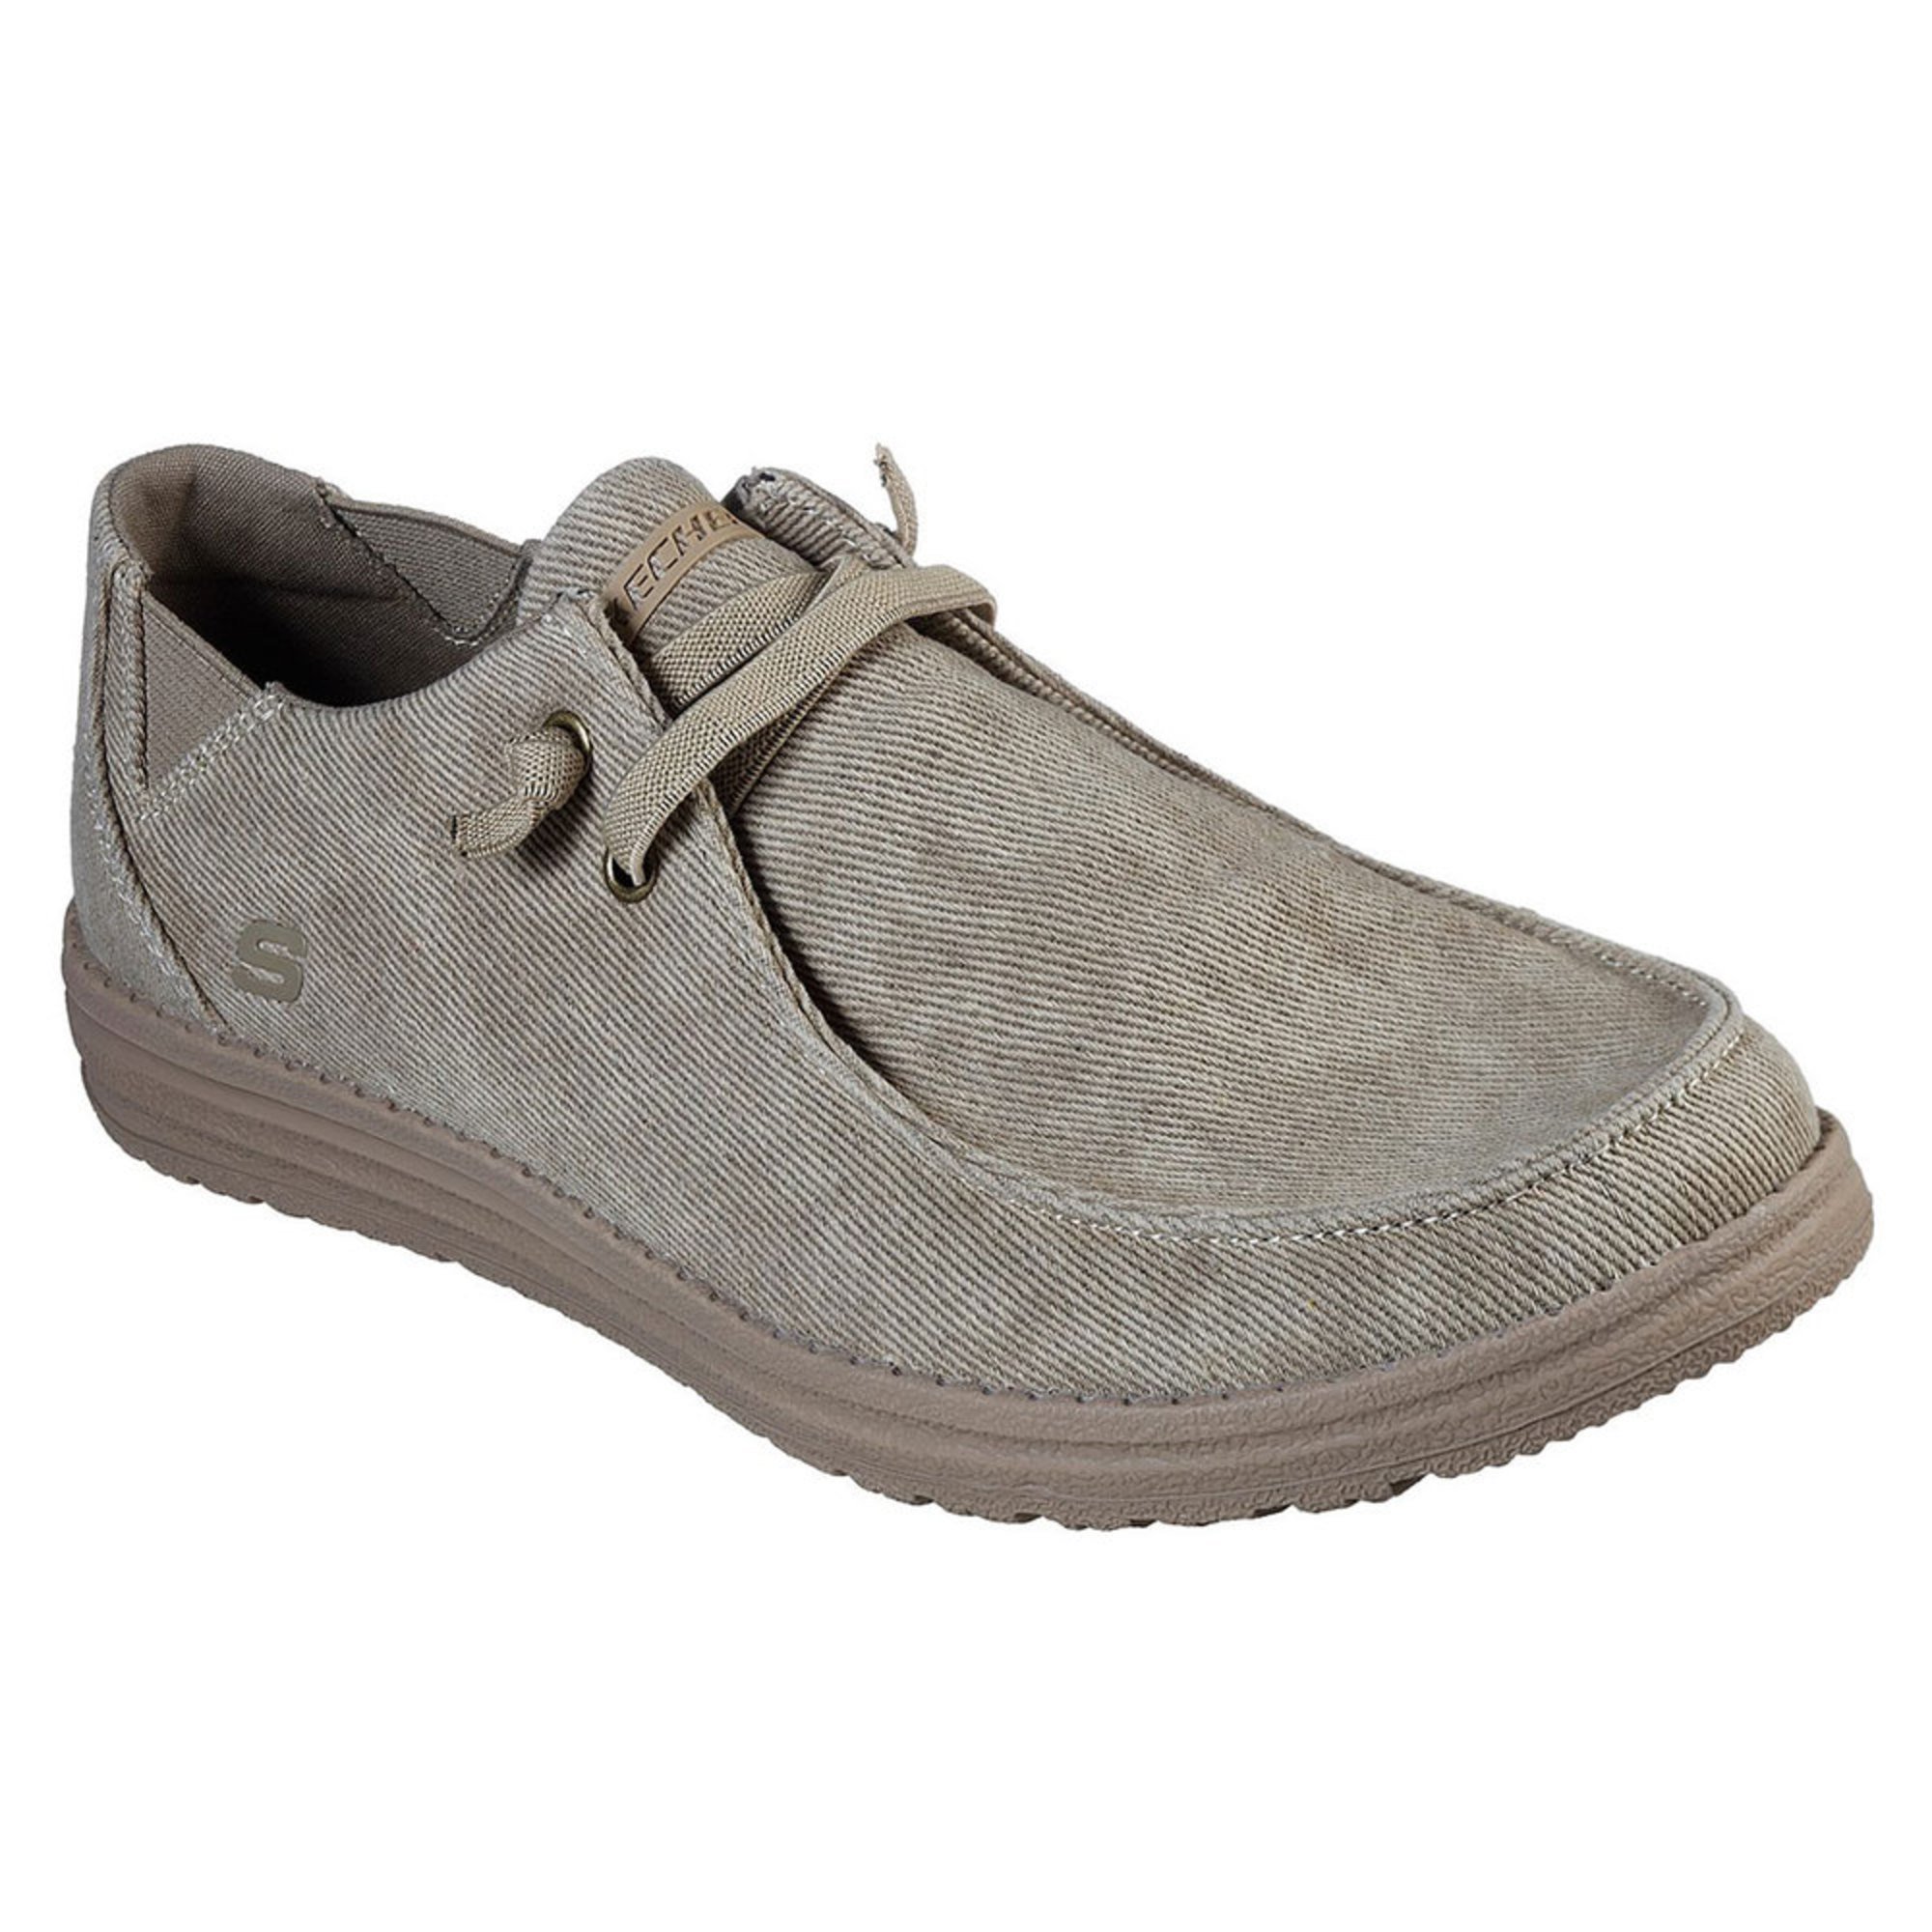 Skechers Usa Men's Melson Raymon Canvas Slip On | Men's Casual Shoes ...